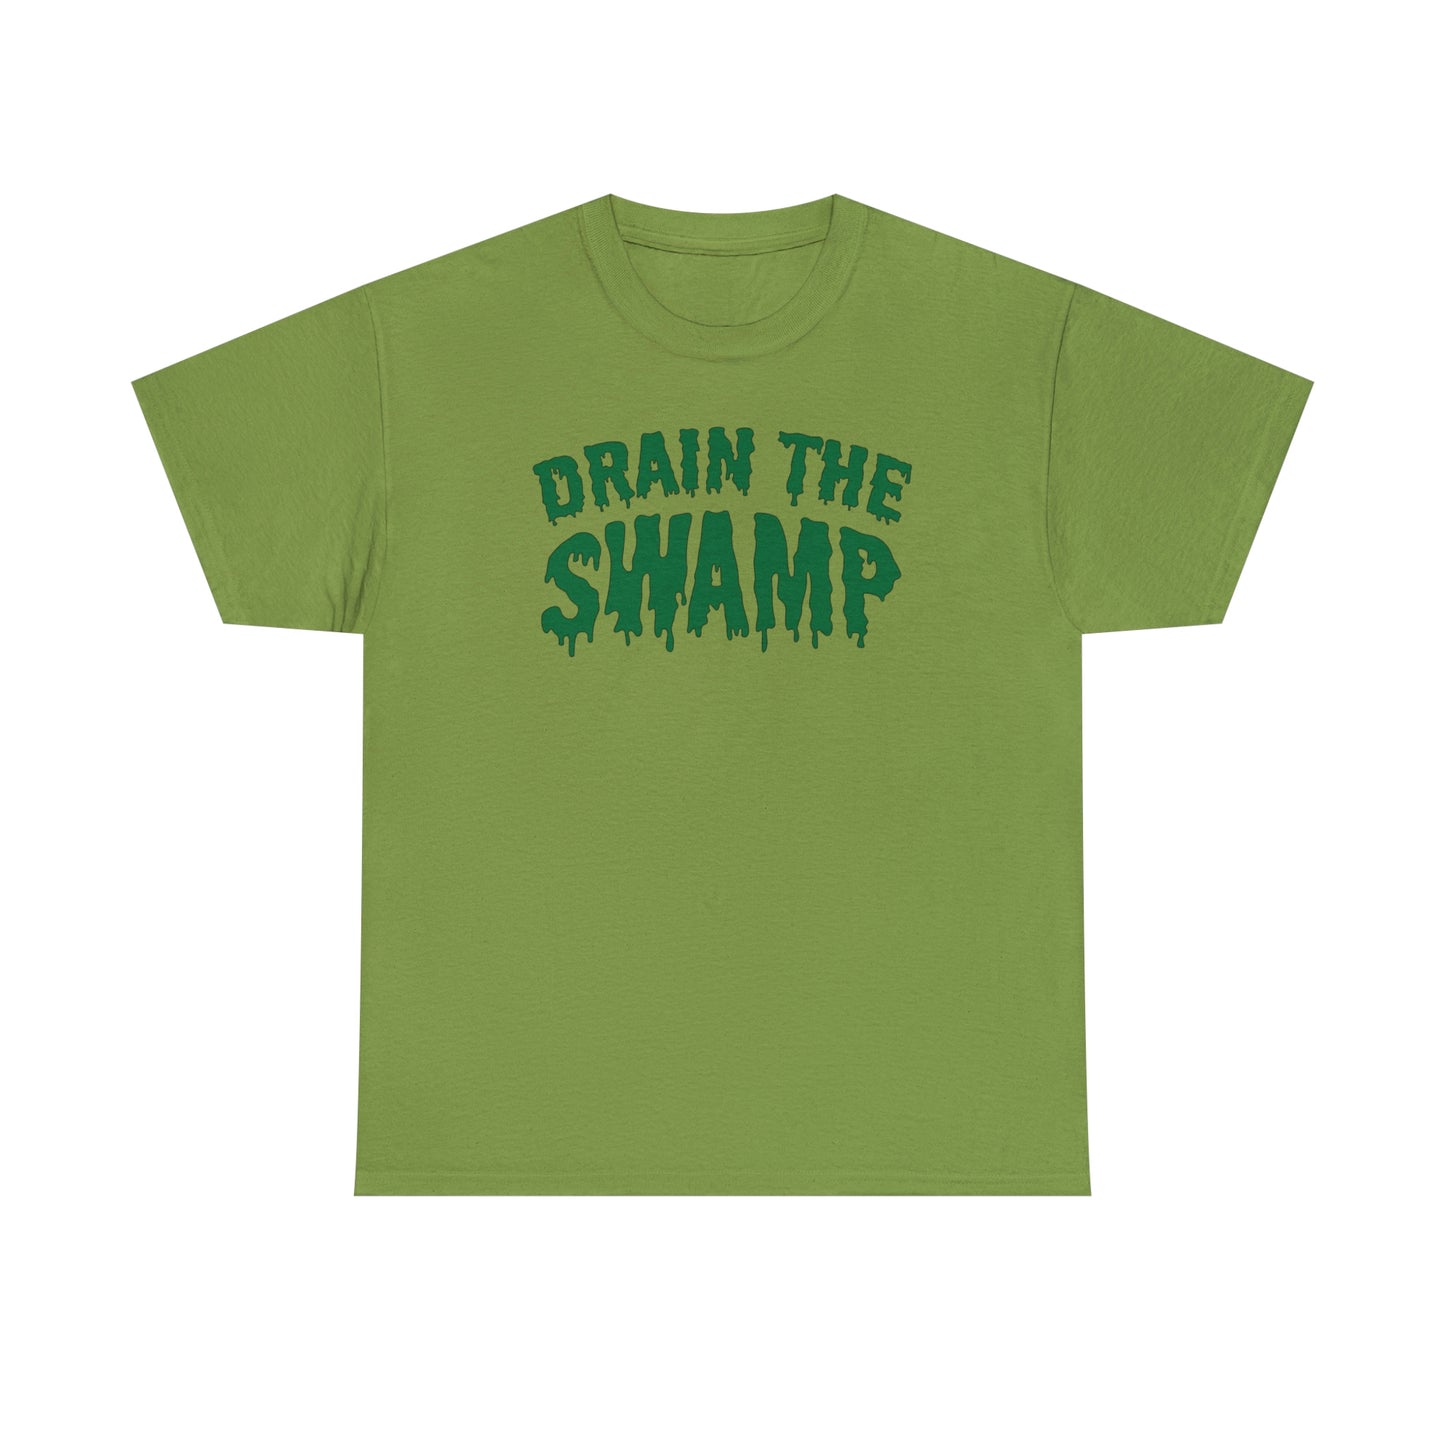 Drain The Swamp T-shirt For Conservative TShirt For Patriot Shirt Pro Trump T Shirt For American Anti Political Corruption Shirt